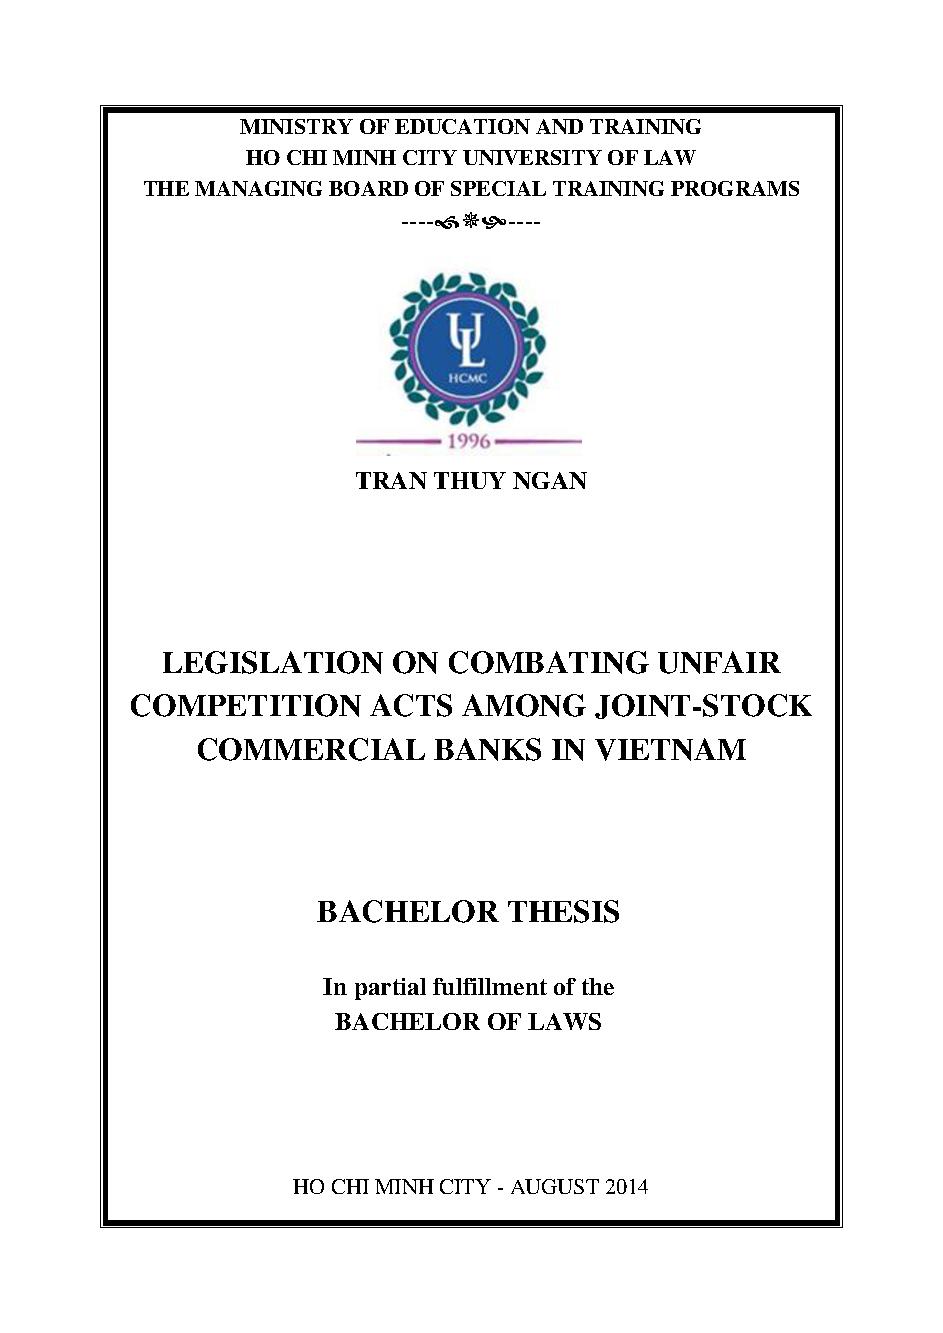 Legislation on combating unfair competition acts among joint-stock commercial banks in Vietnam